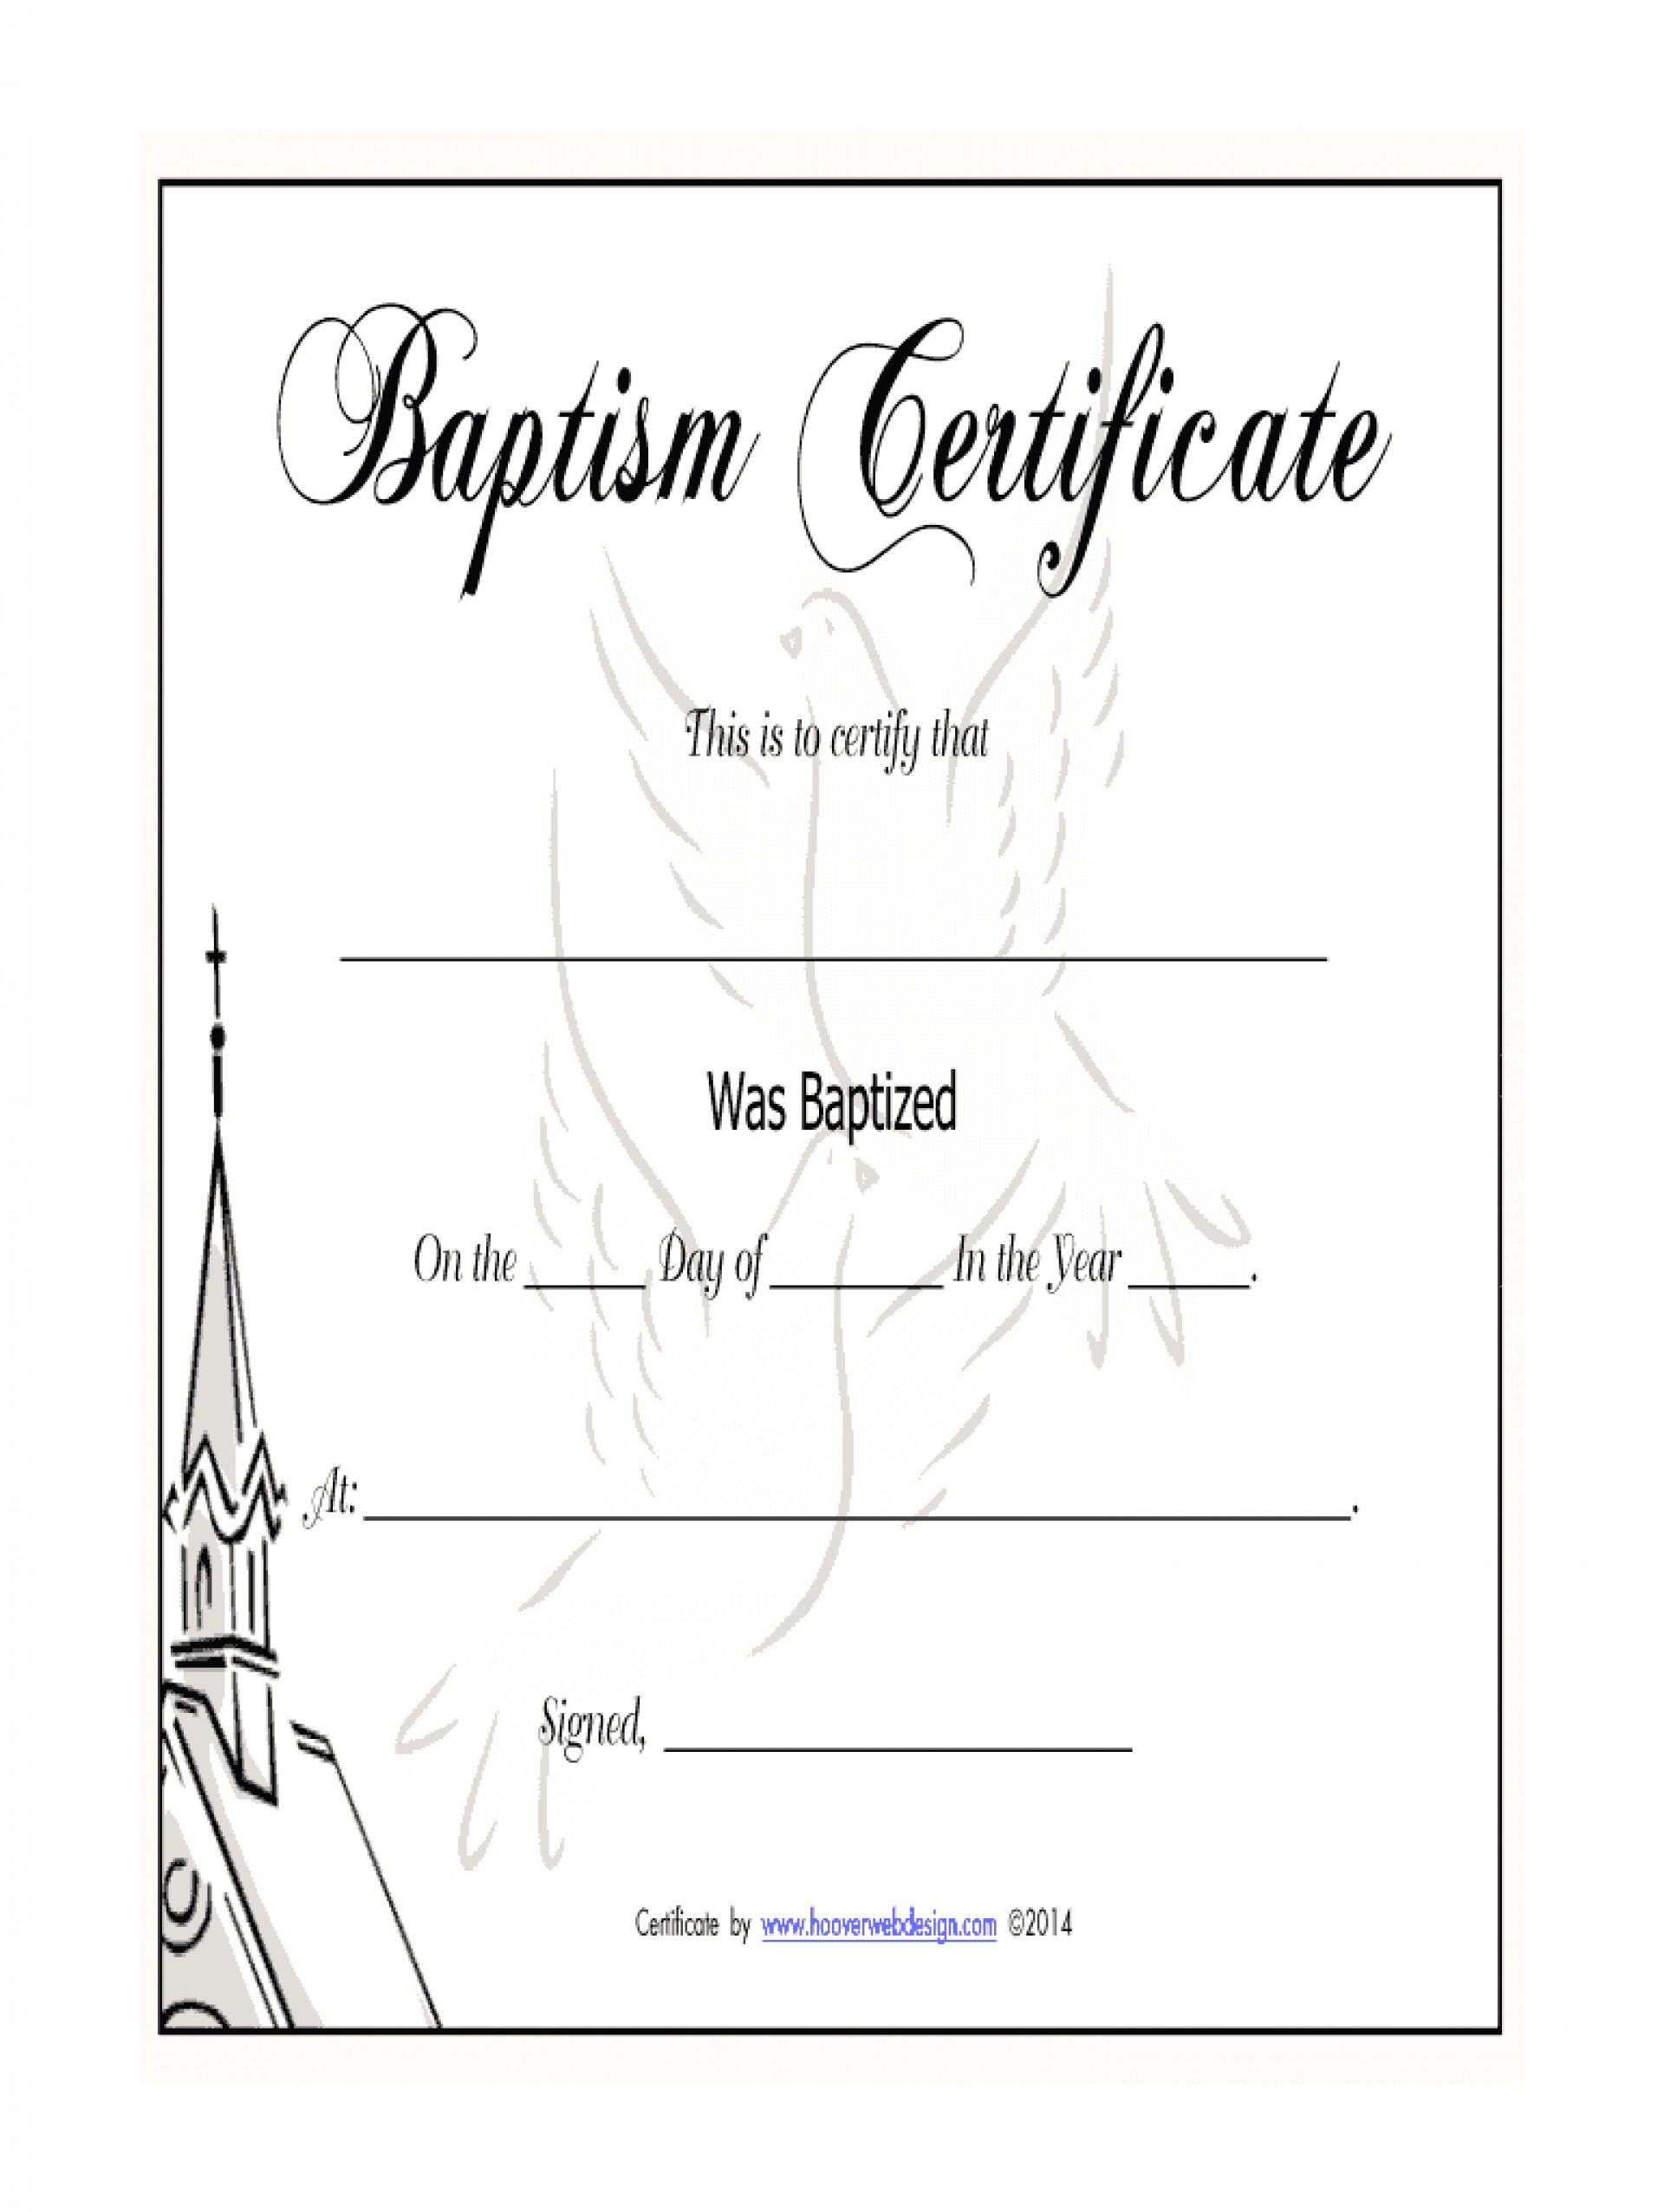 F995 Certificate Of Baptism Template | Wiring Resources Inside Baptism Certificate Template Word